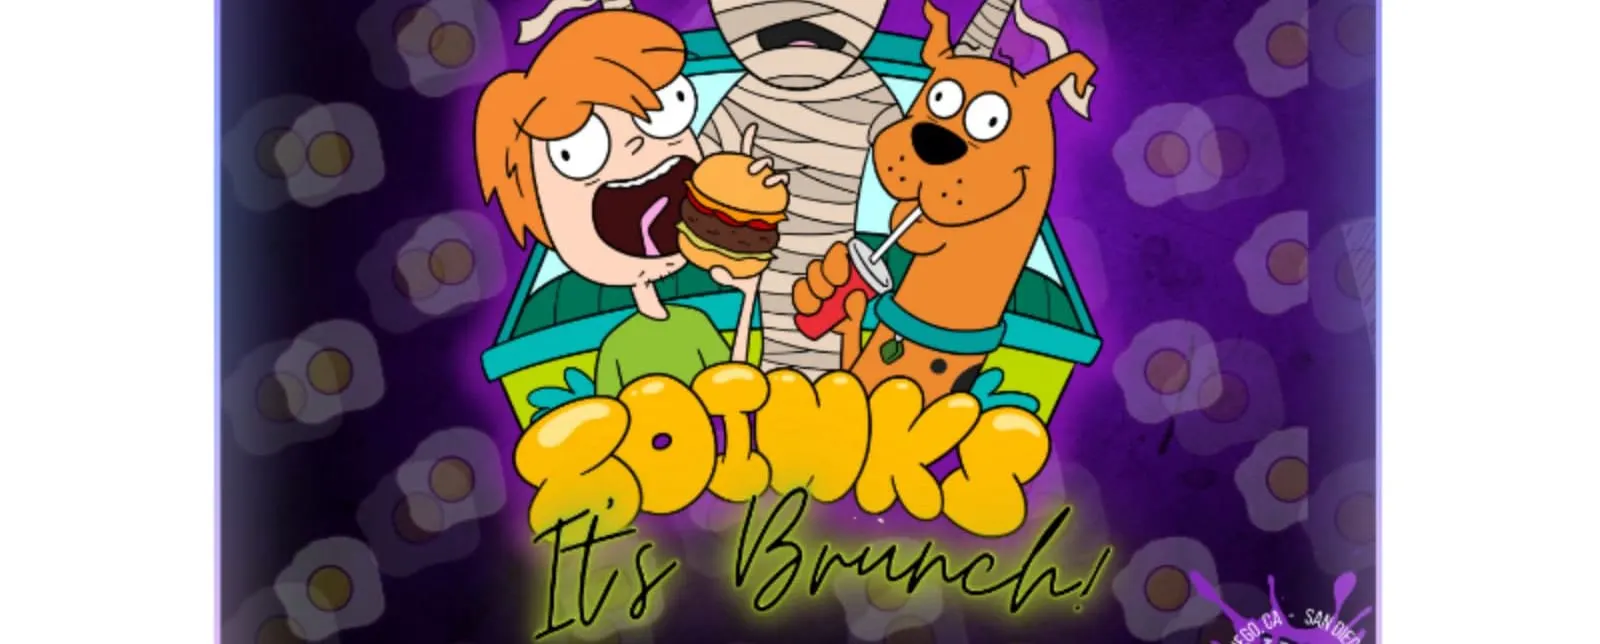 Zoinks! It's Brunch - Scooby Doo Theme Event